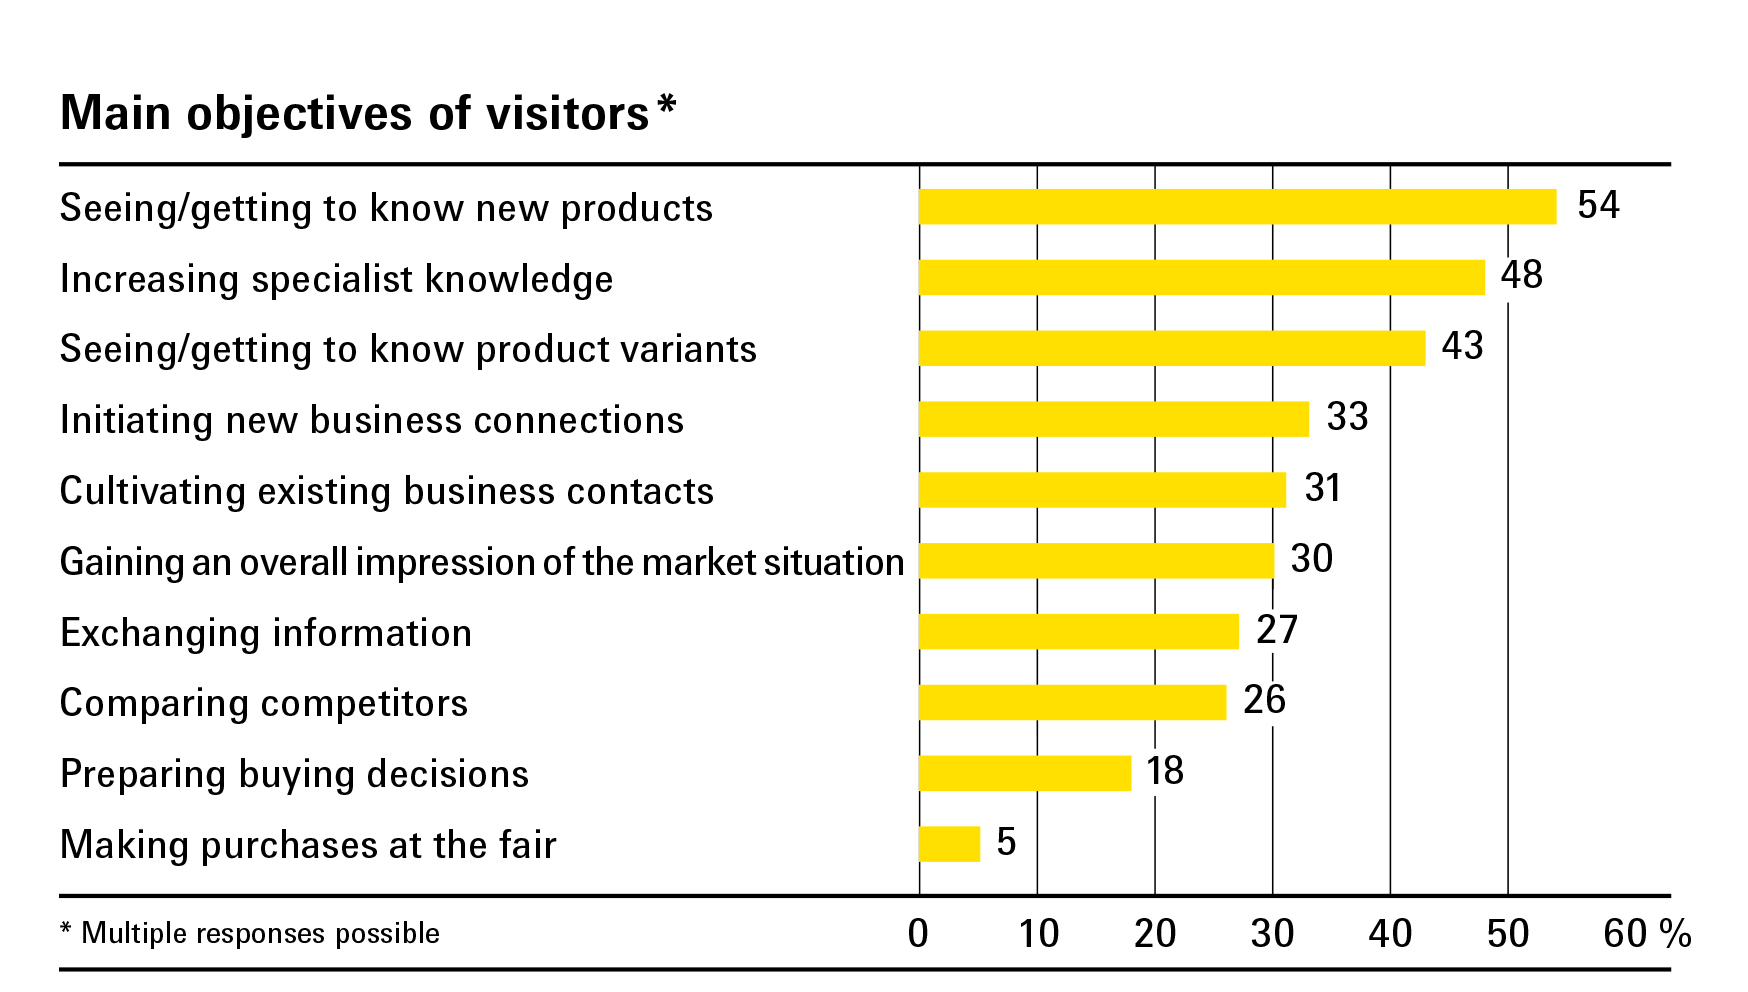 Main objectives of visitors